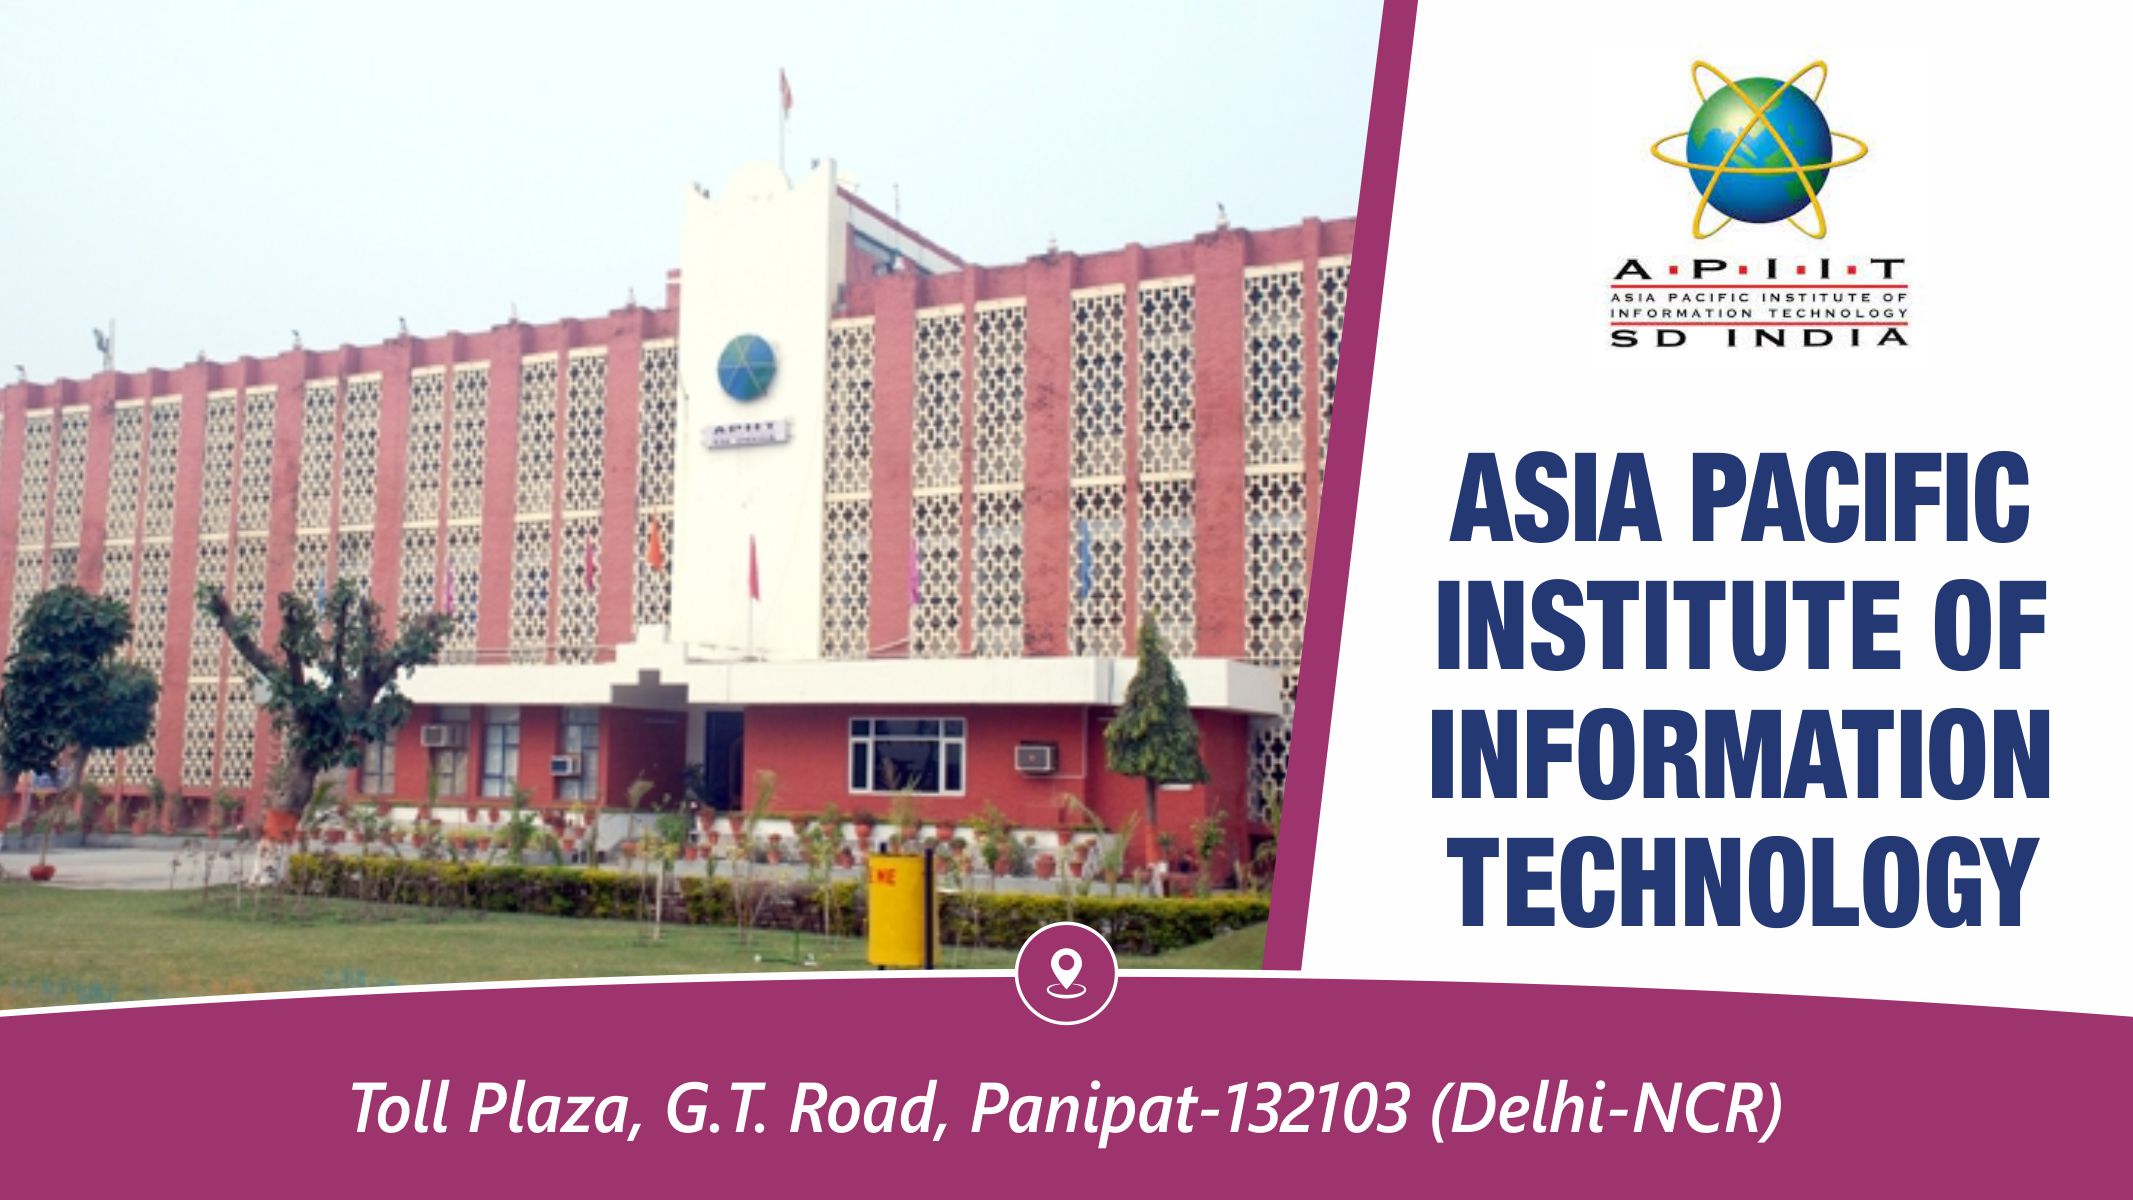 Out Side View of Asia Pacific Institute of Information Technology - APIIT